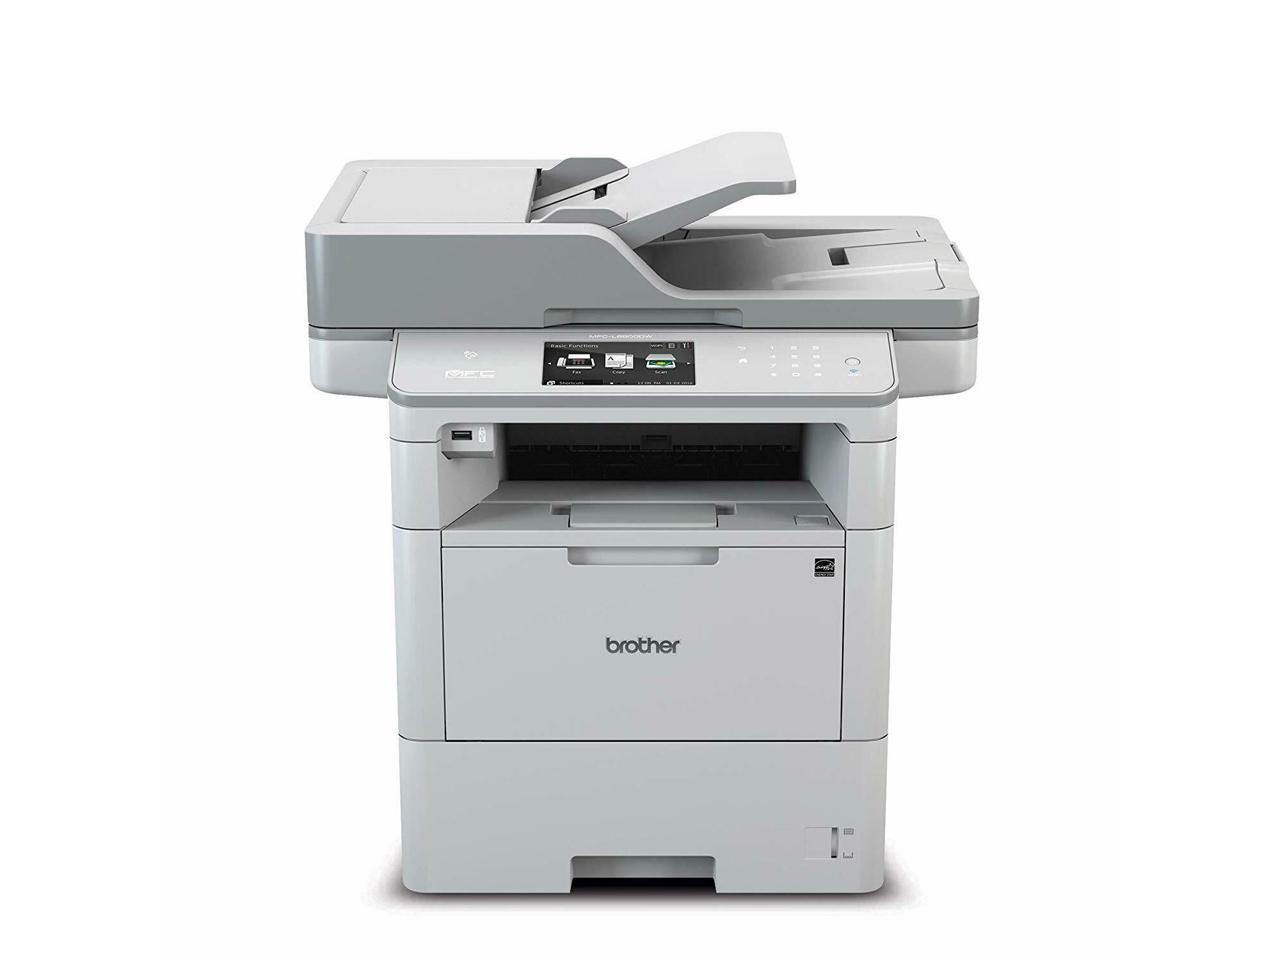 Brother Business Color Laser All-in-One MFC-L9570CDW - Duplex Printing - Wireless LAN - Copier/Fax/Printer/Scanner - 33 ppm Mono/33 ppm Color - 2400 x 600 dpi Print - 7" LCD Touchscreen - Gigabit